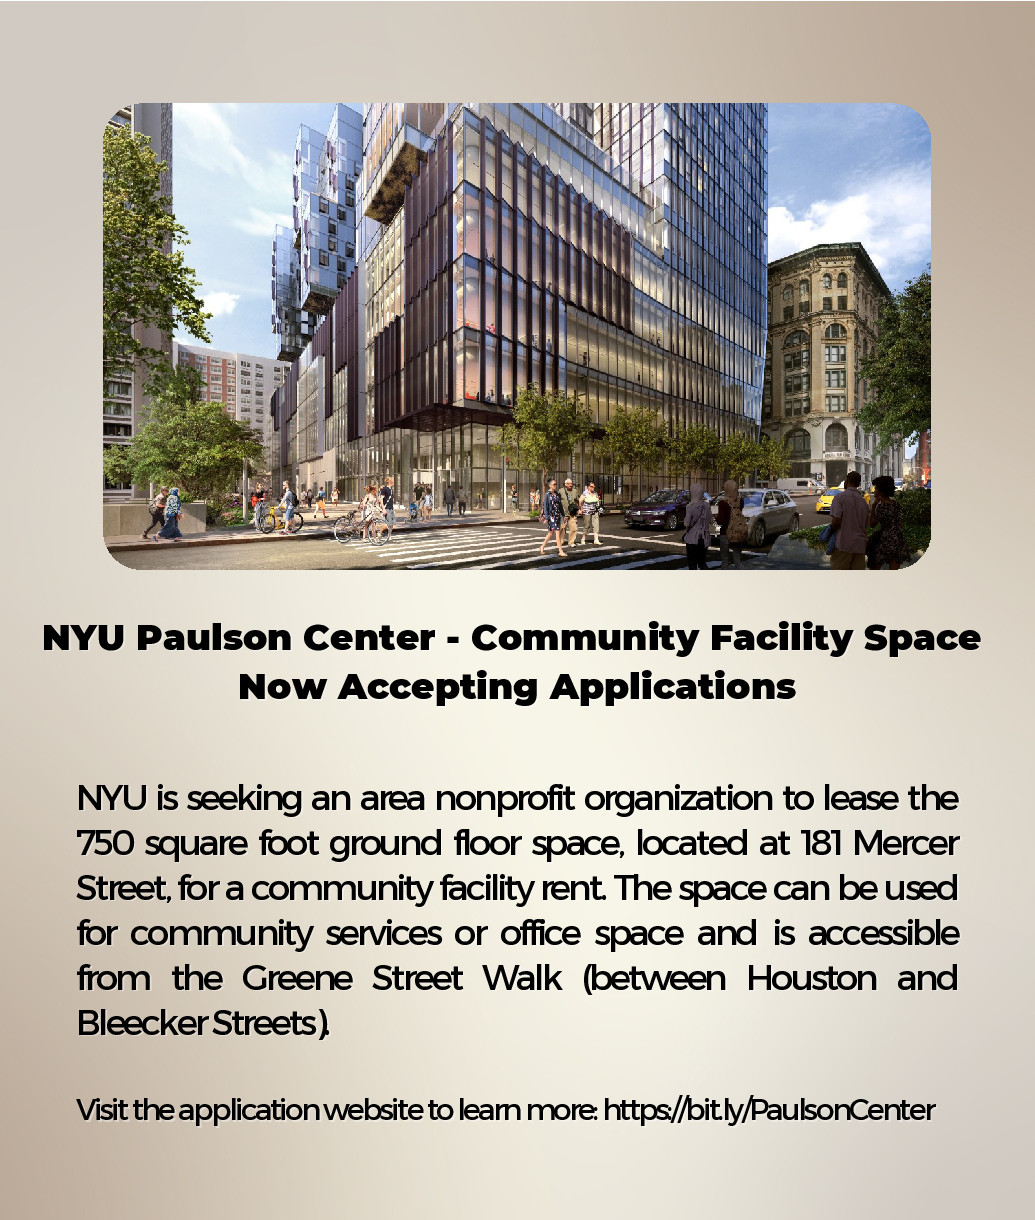 NYU is seeking an area nonprofit organization to lease the 750 square foot ground floor space at the Paulson Center at 181 Mercer Street for a community facility rent. The space could be used for community services or office space. If you or someone you know may be interested in tenancy, please submit the online application form.